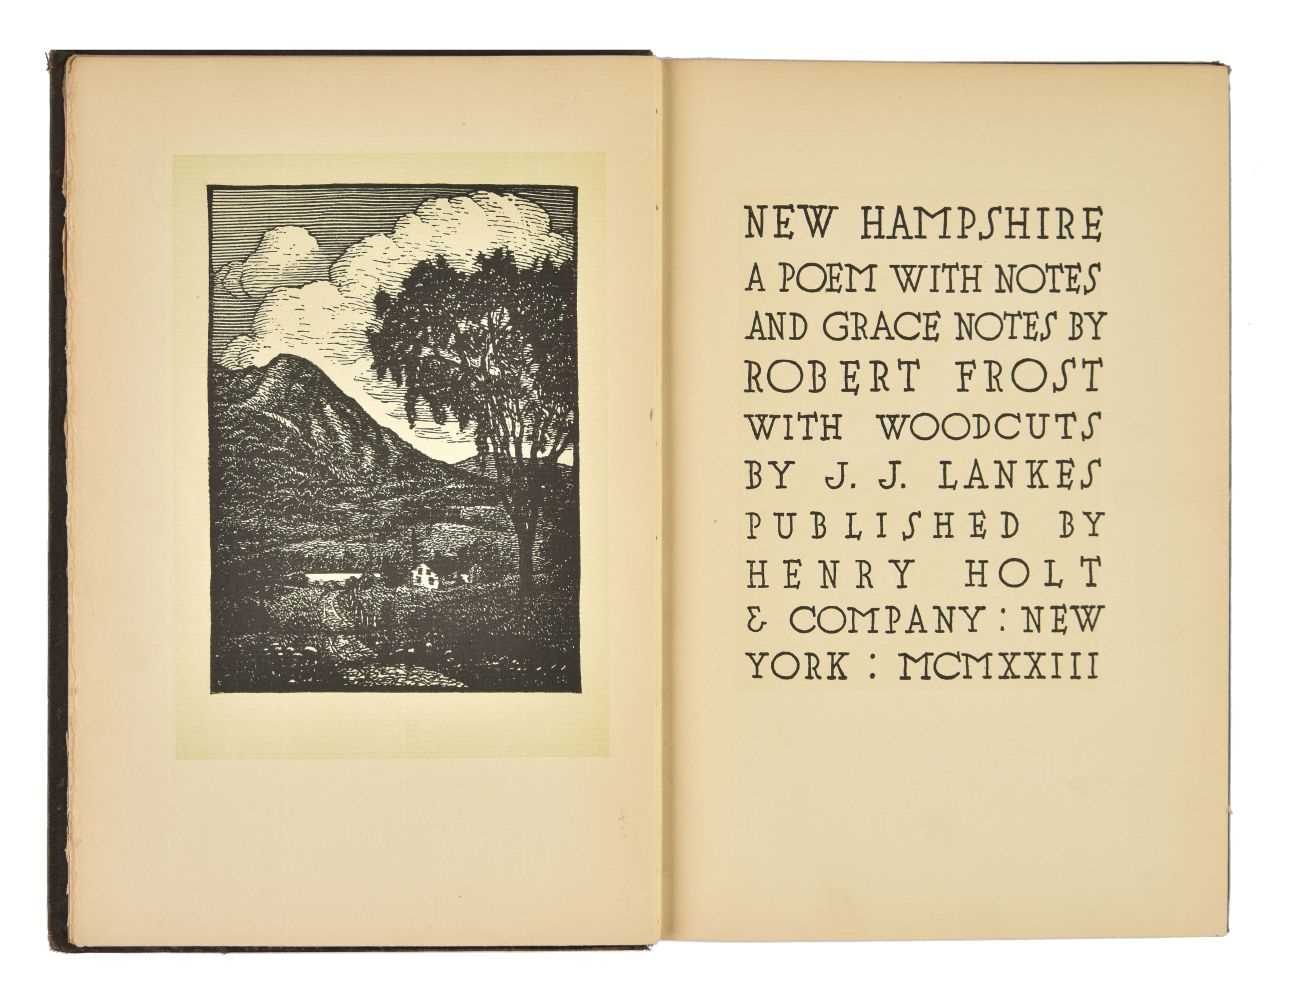 Lot 698 - Frost (Robert). New Hampshire. A Poem with Notes and Grace Notes, 1923